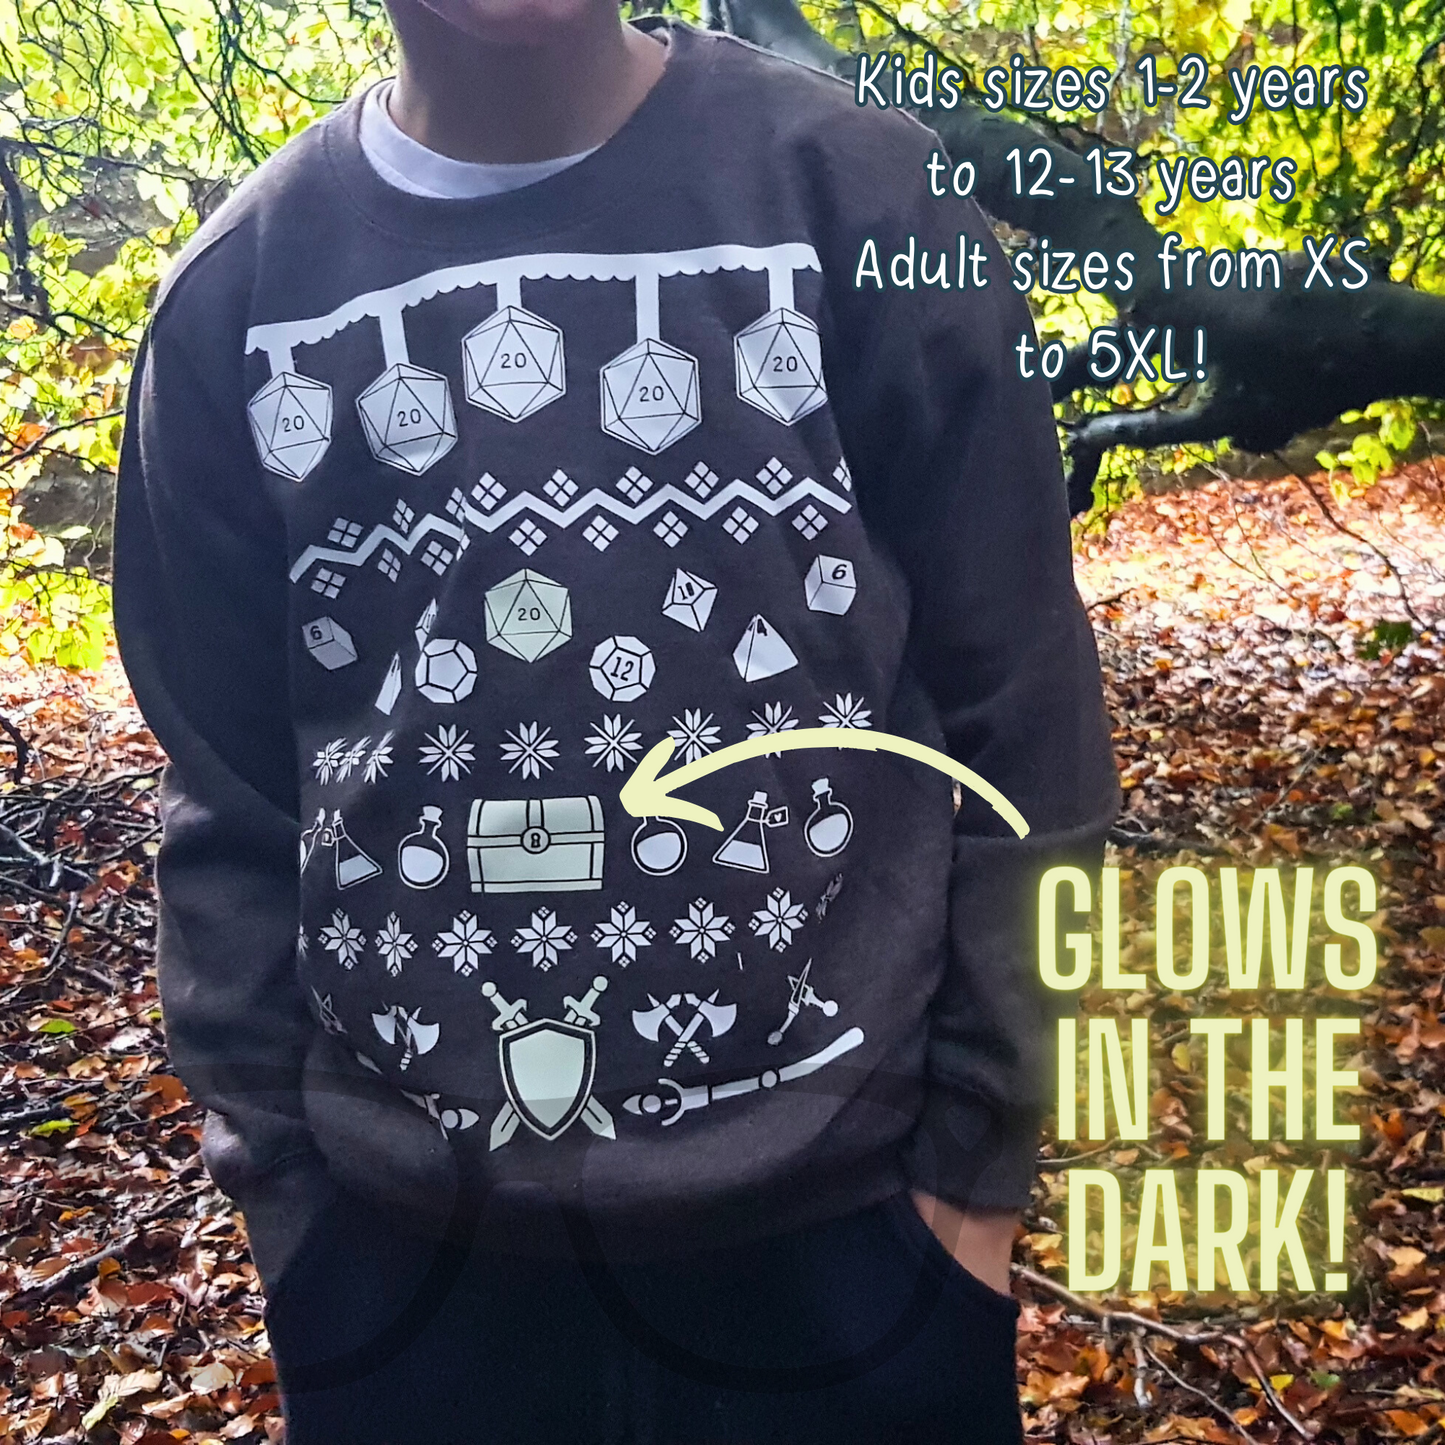 DnD themed Christmas Ugly sweater for kids and adults text reads "Kids sizes 1-2 years adult sizes from xs to 5xl" "GLOWS IN THE DARK!"